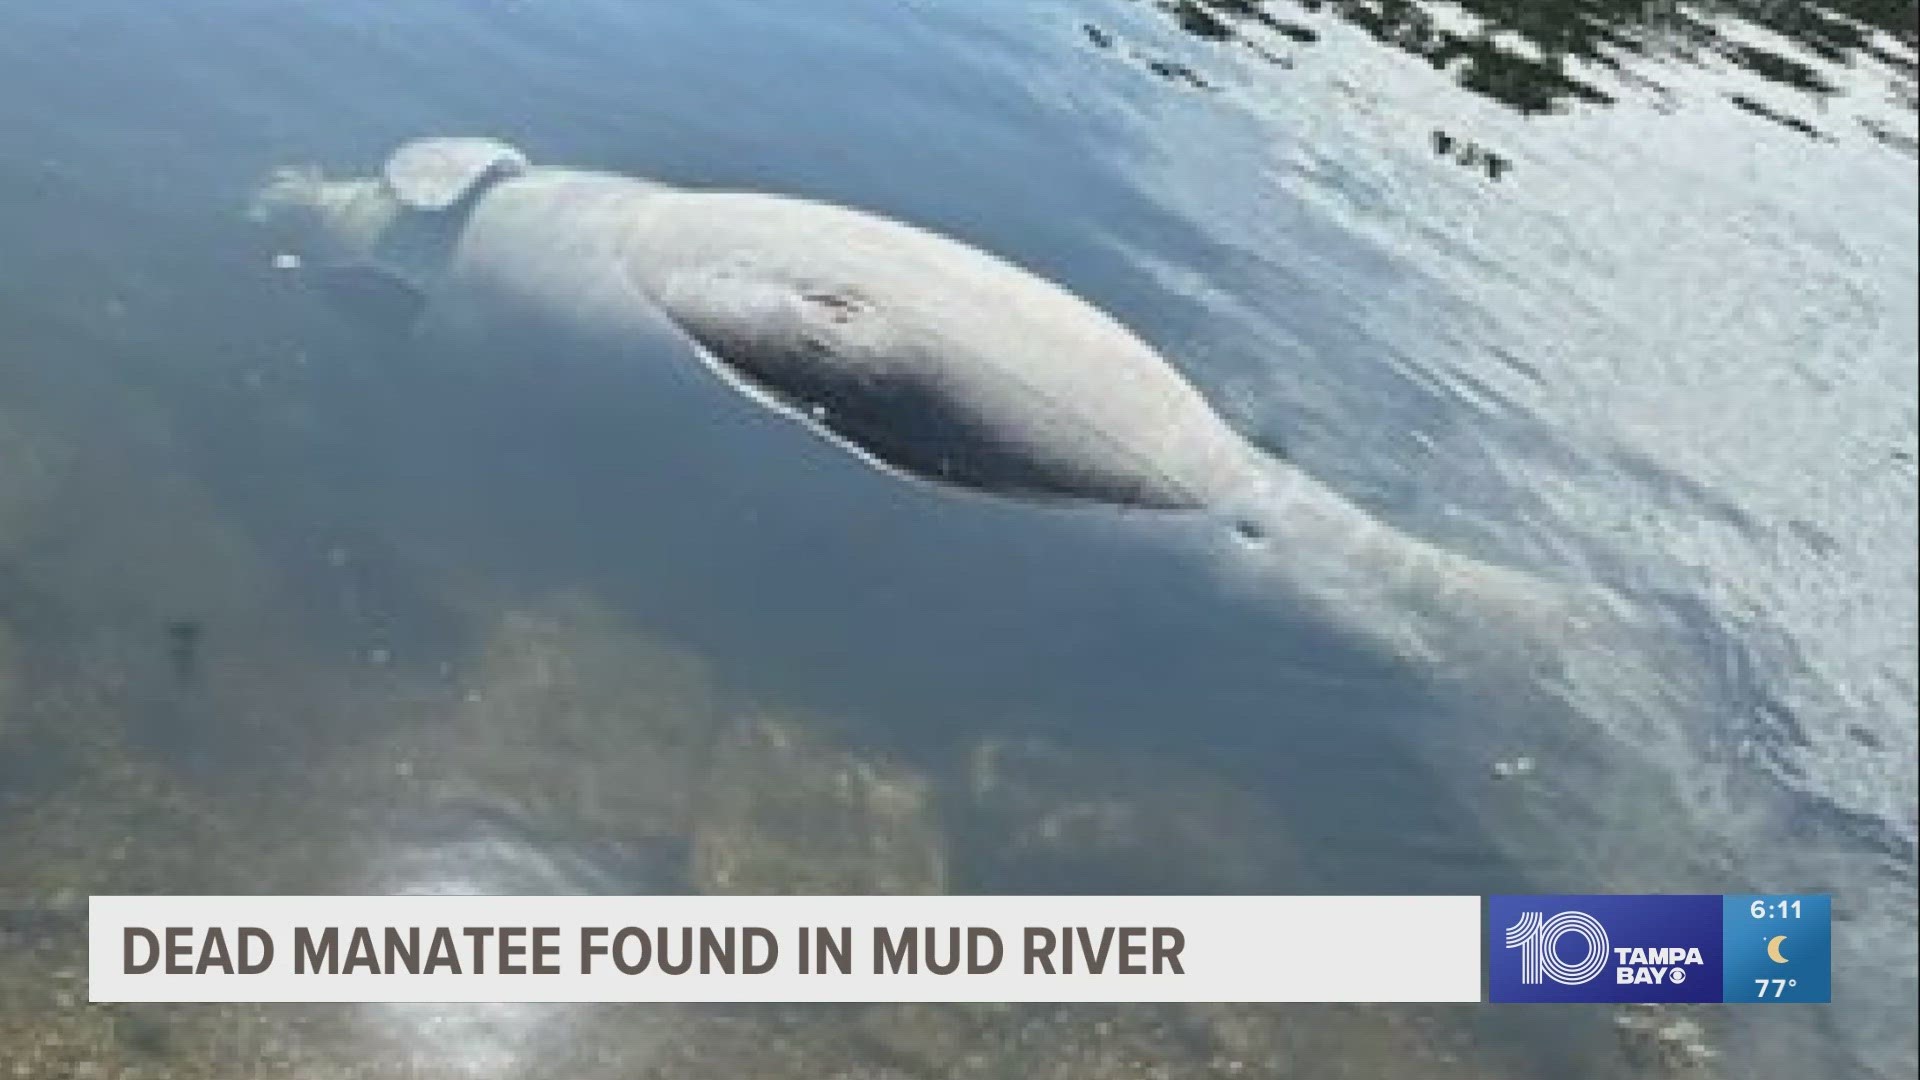 This is the sixth manatee found dead in the Mud River in recent months.